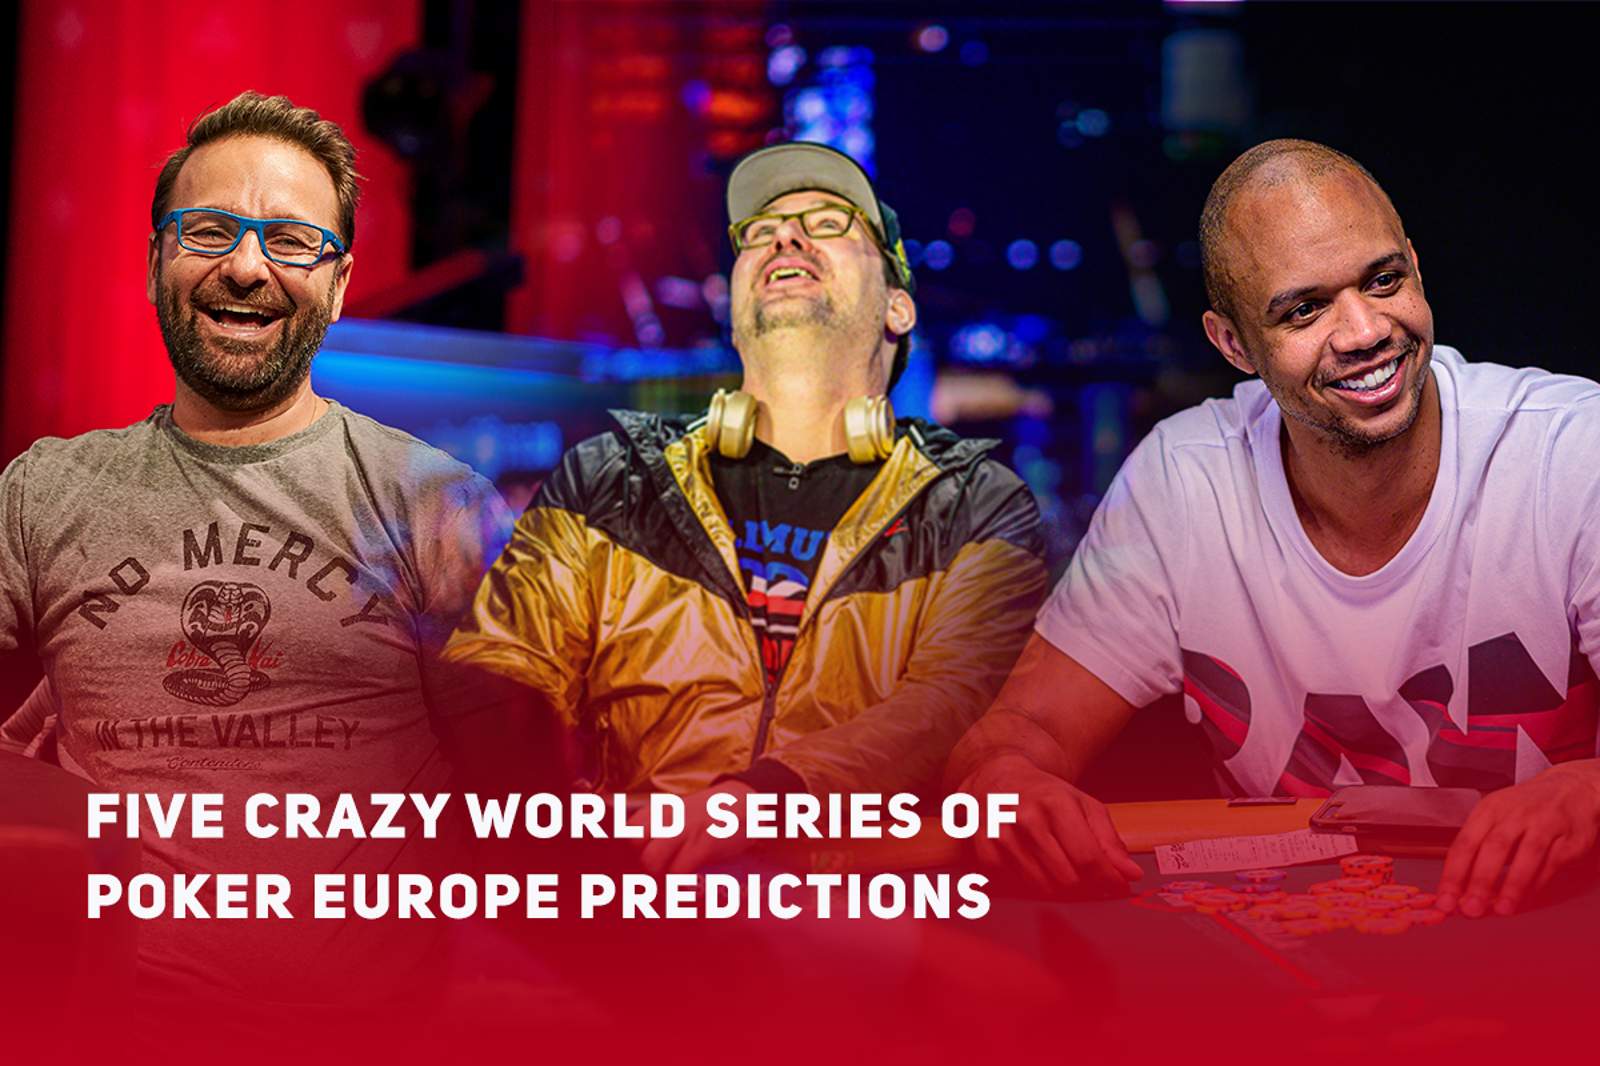 Five Crazy World Series of Poker Europe Predictions